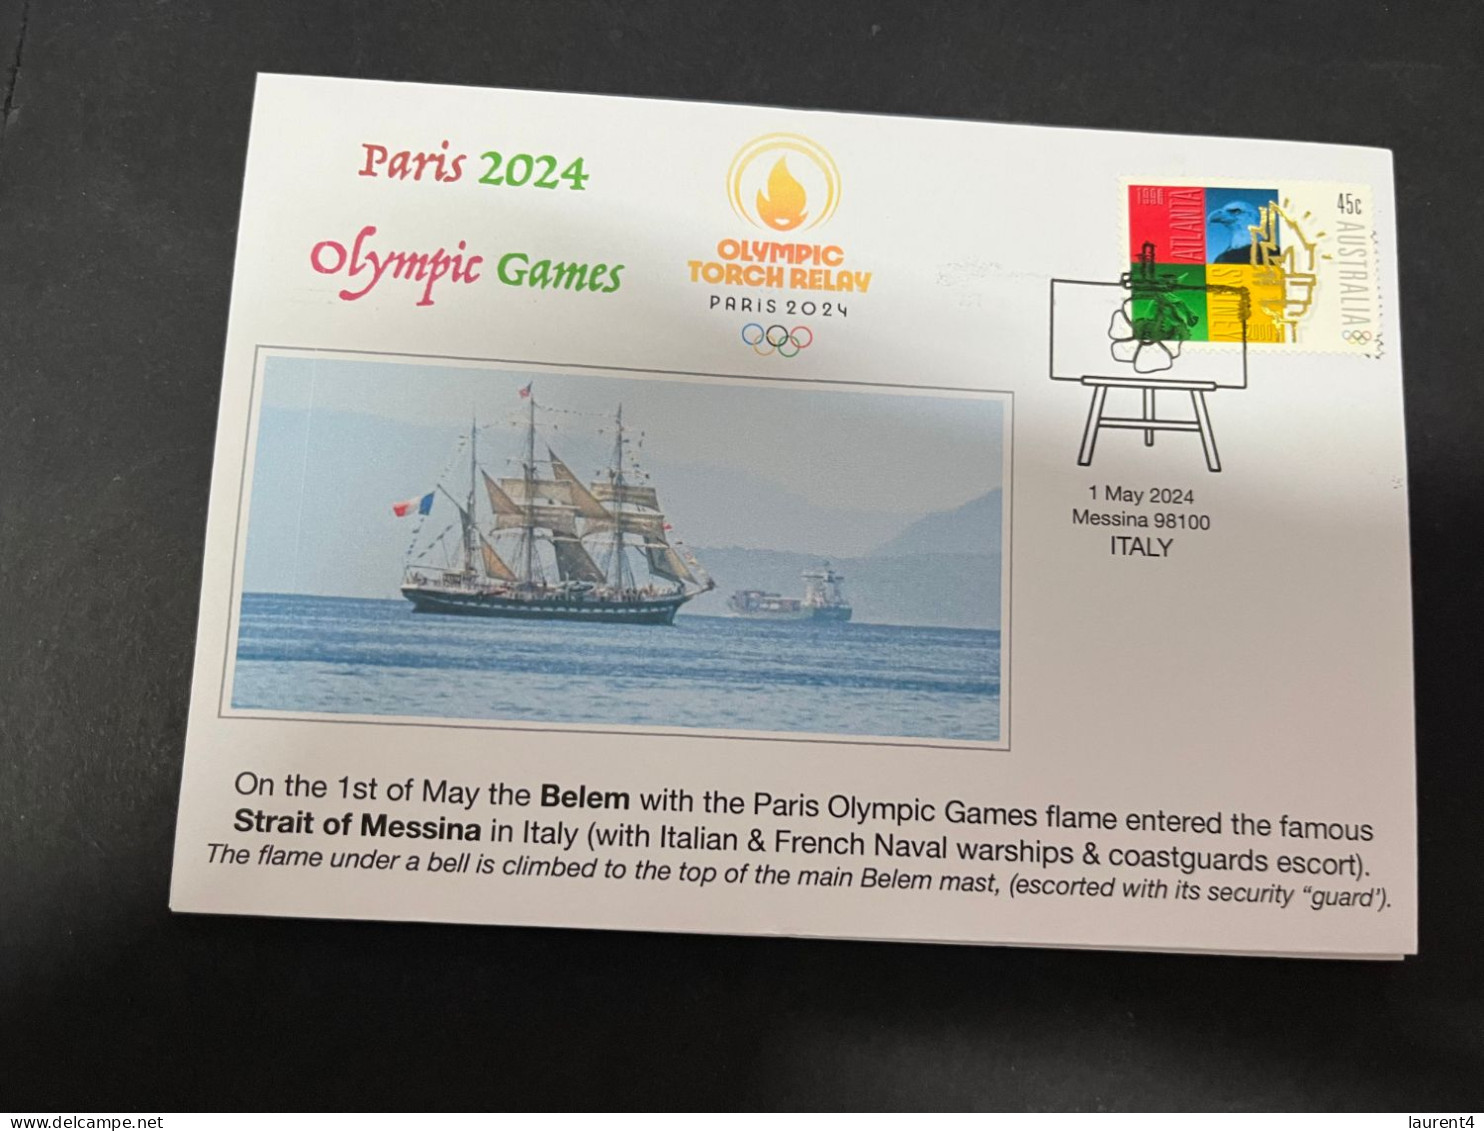 17-5-2024 (5 Z 23) Paris Olympic Games 2024 - The Olympic Flame Travel On Sail Ship BELEM (3 Covers) - Sommer 2024: Paris